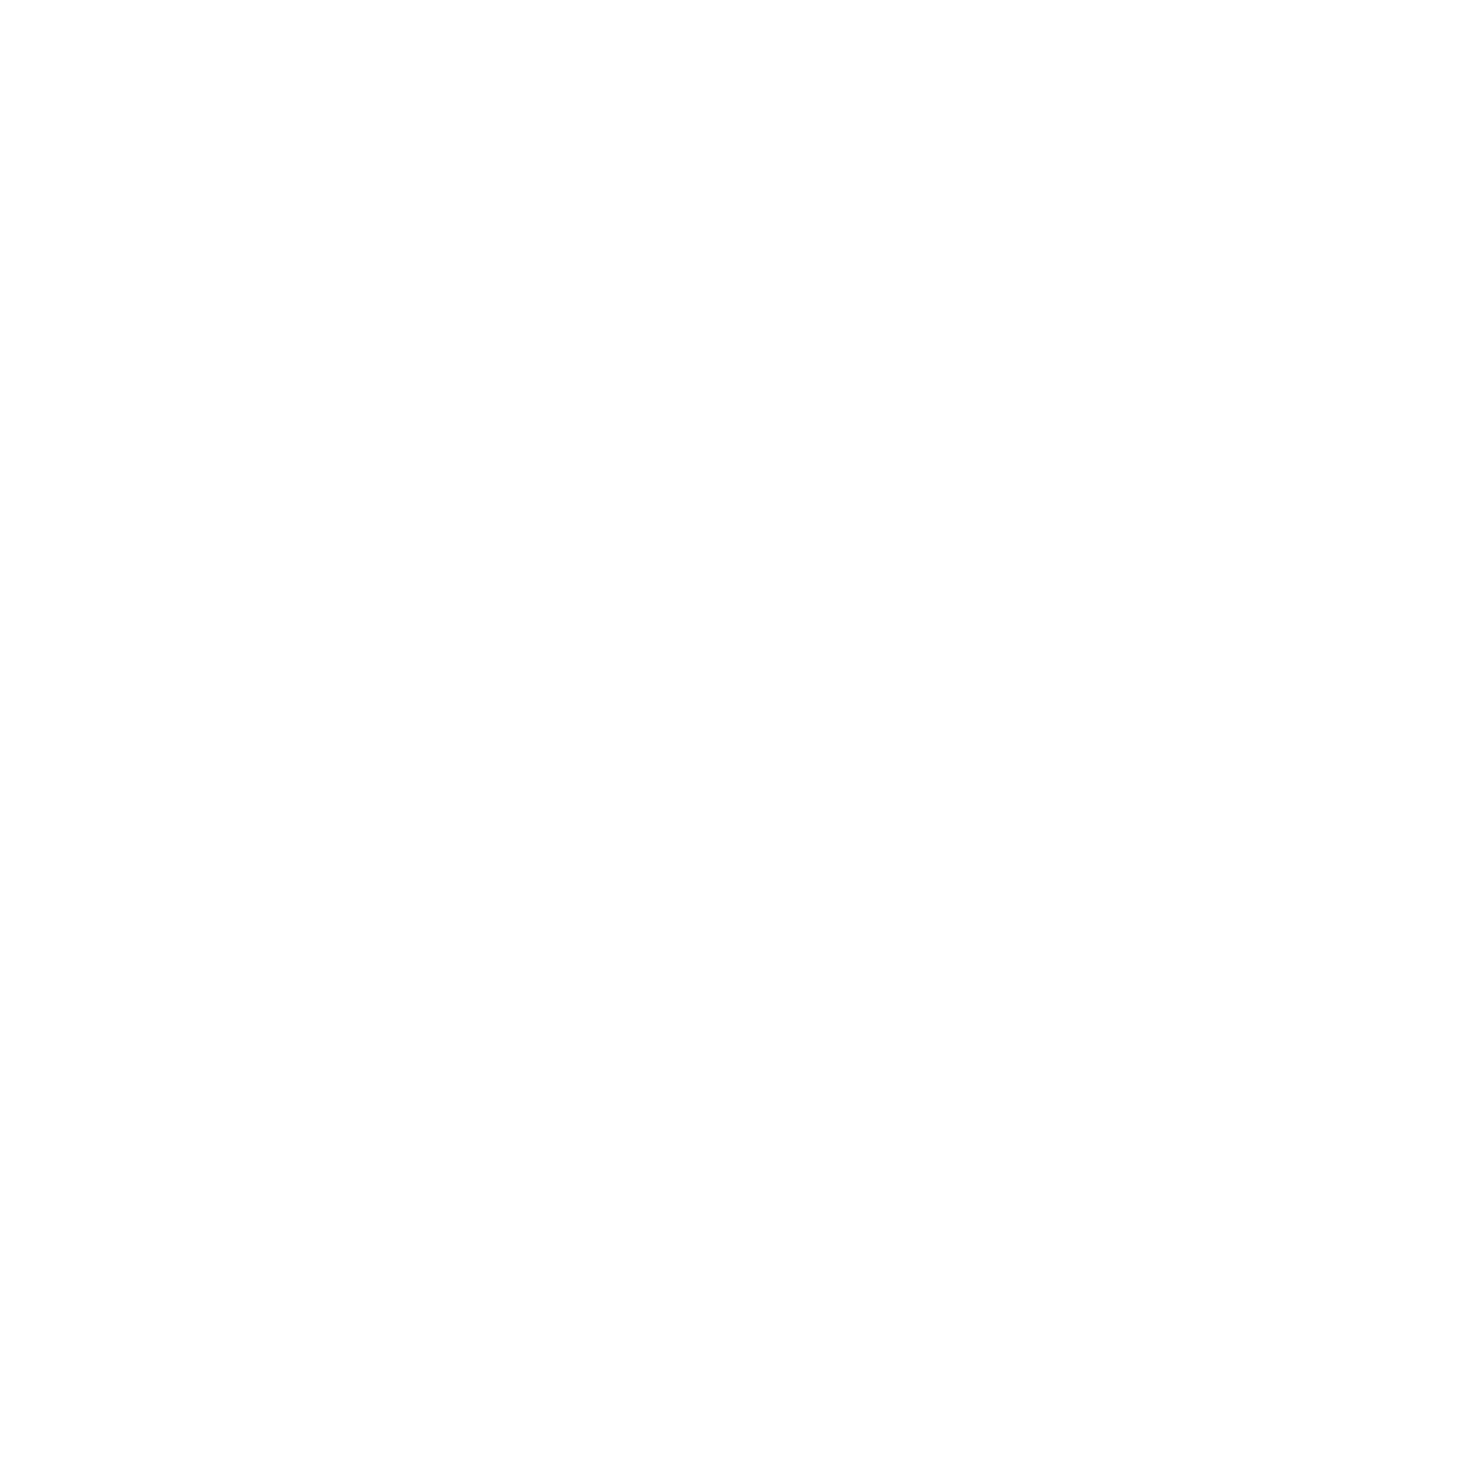 What that movie reference in 'The Last of Us' episode 6 means for